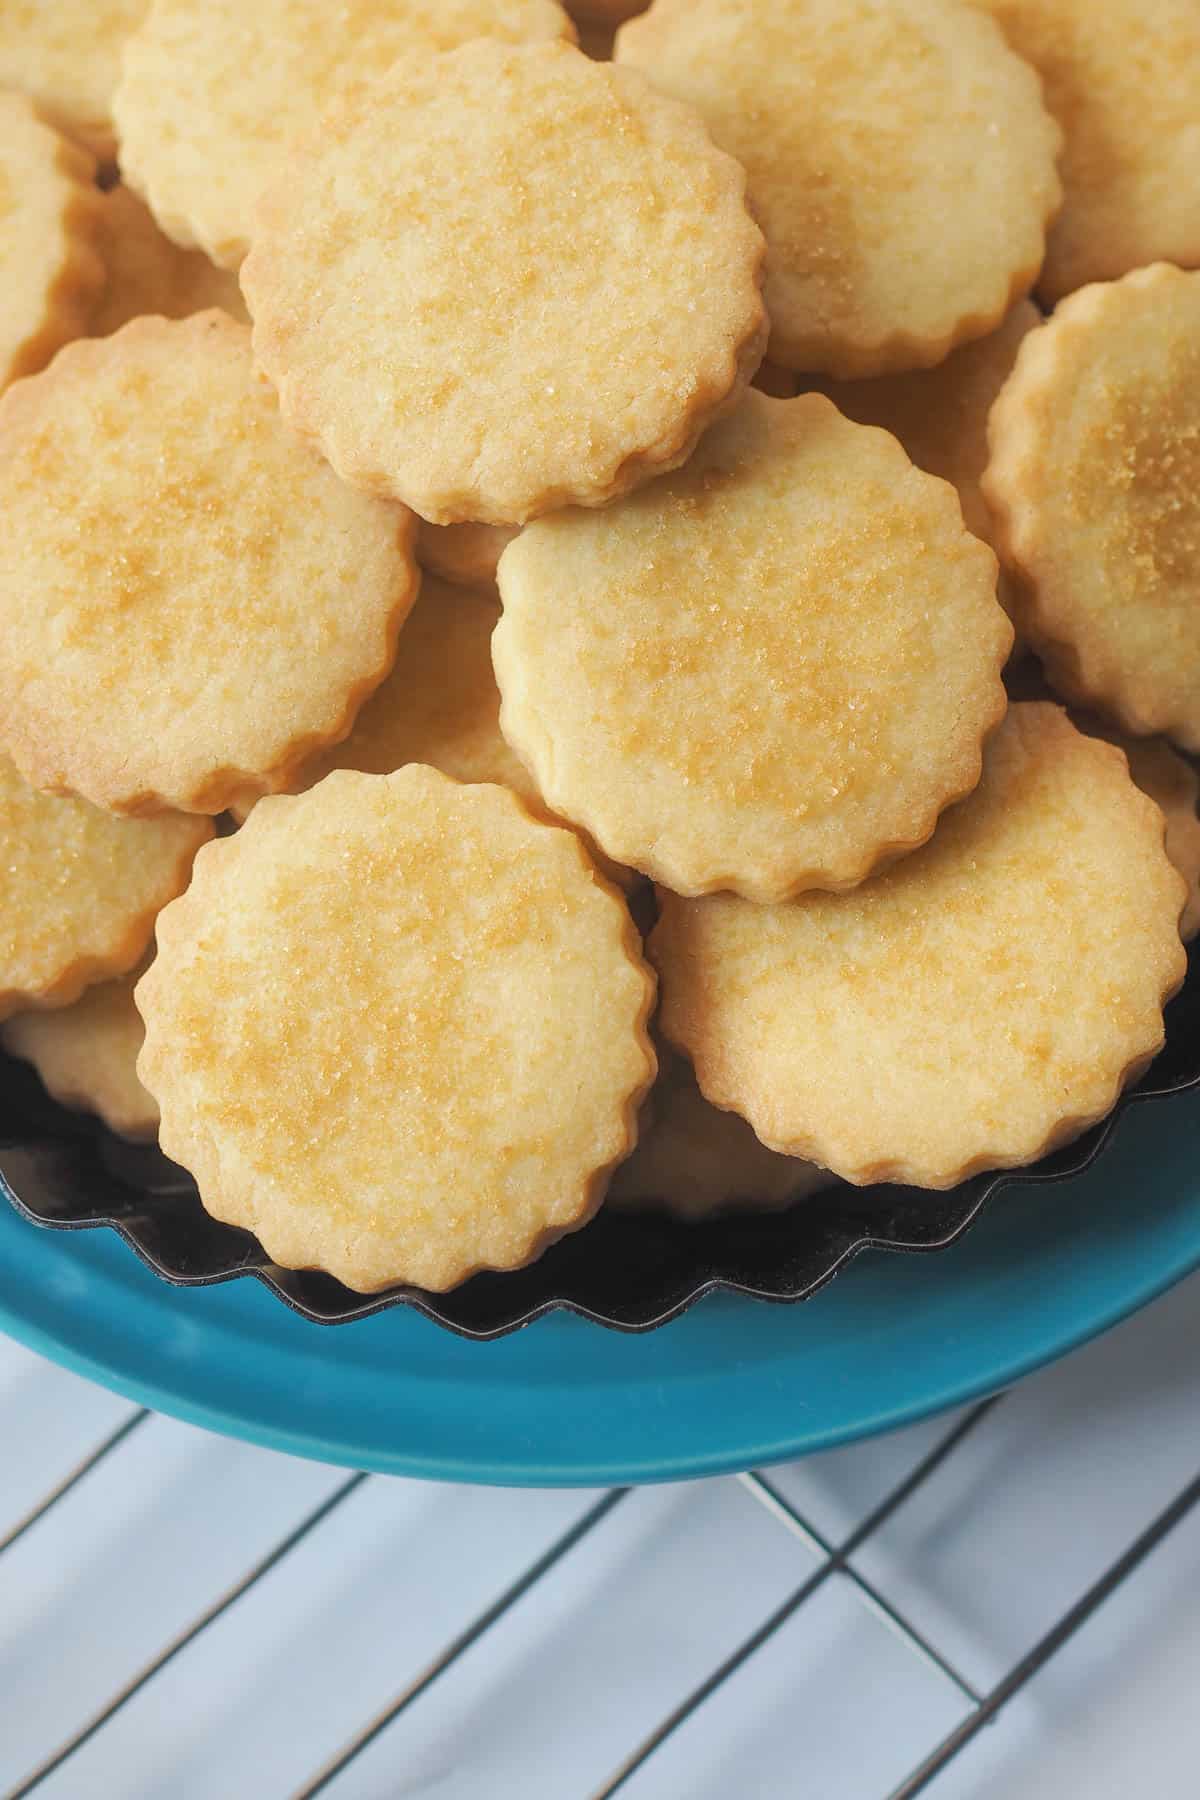 Scalloped cut out cookies in a blue plate